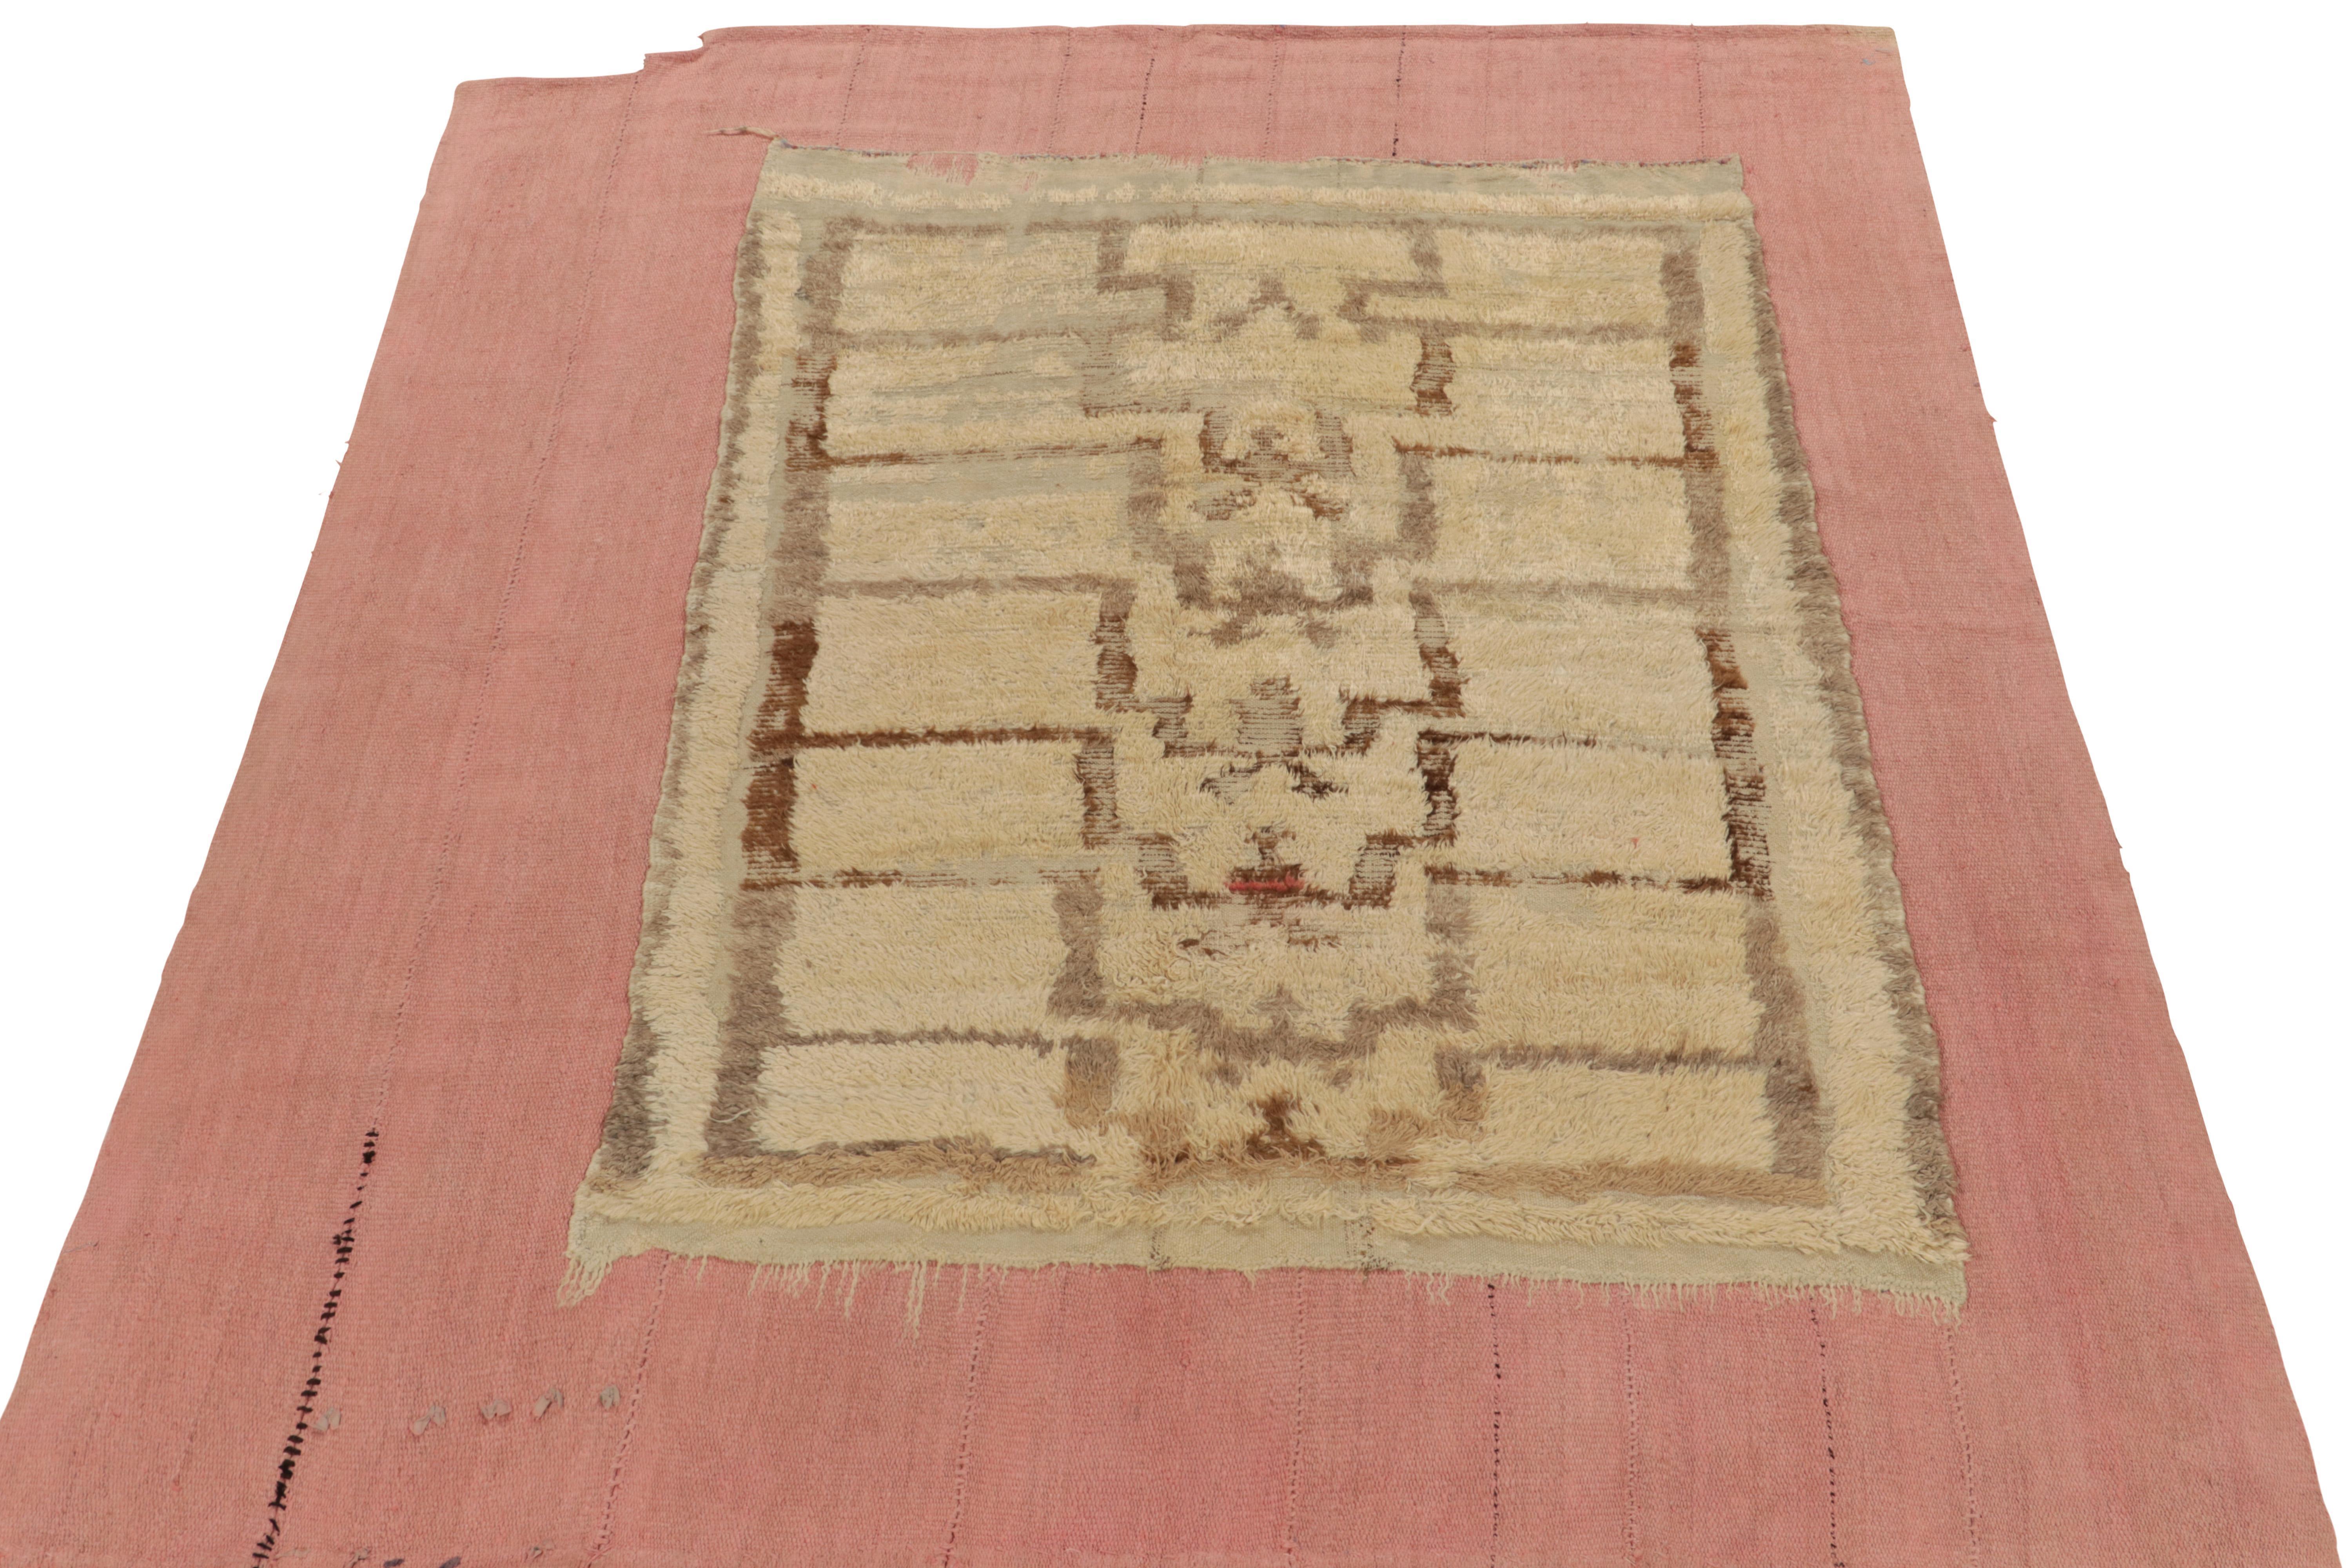 A 7x8 vintage piece from one of the most unique Kilim collections, layering mid-century pile and flat weave rugs into a dynamic modern form. Handwoven in wool, playing shag pile in beige brown against pink for a superimposition of pattern and